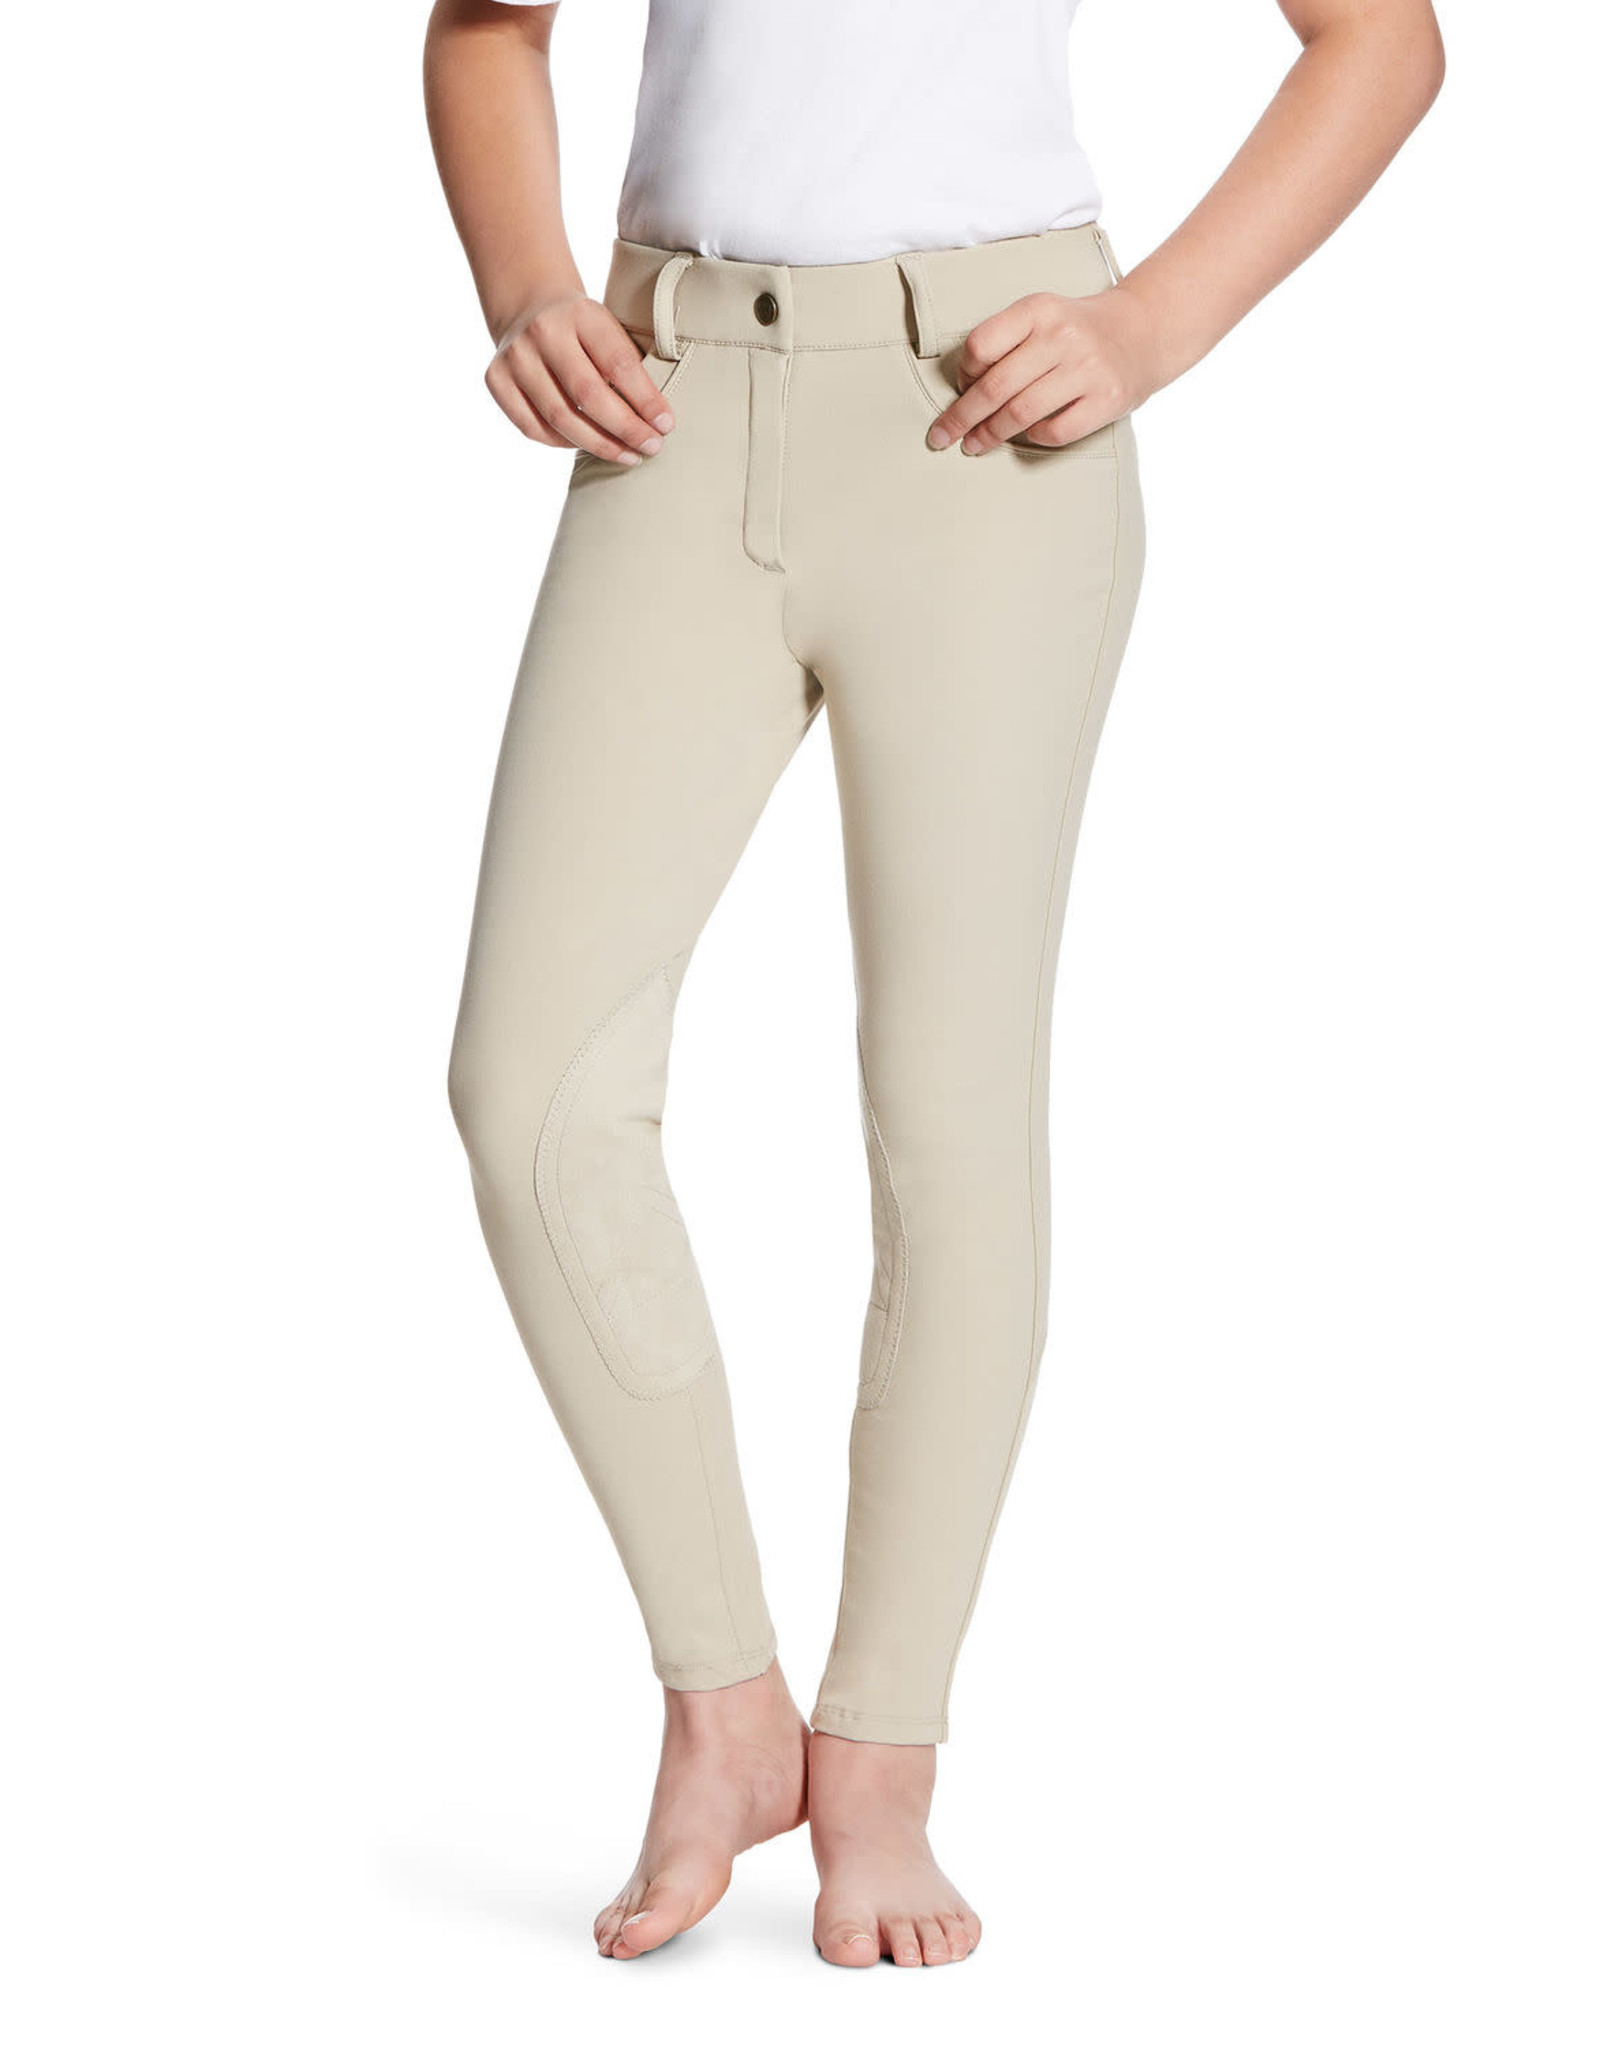 ariat olympia breeches sale